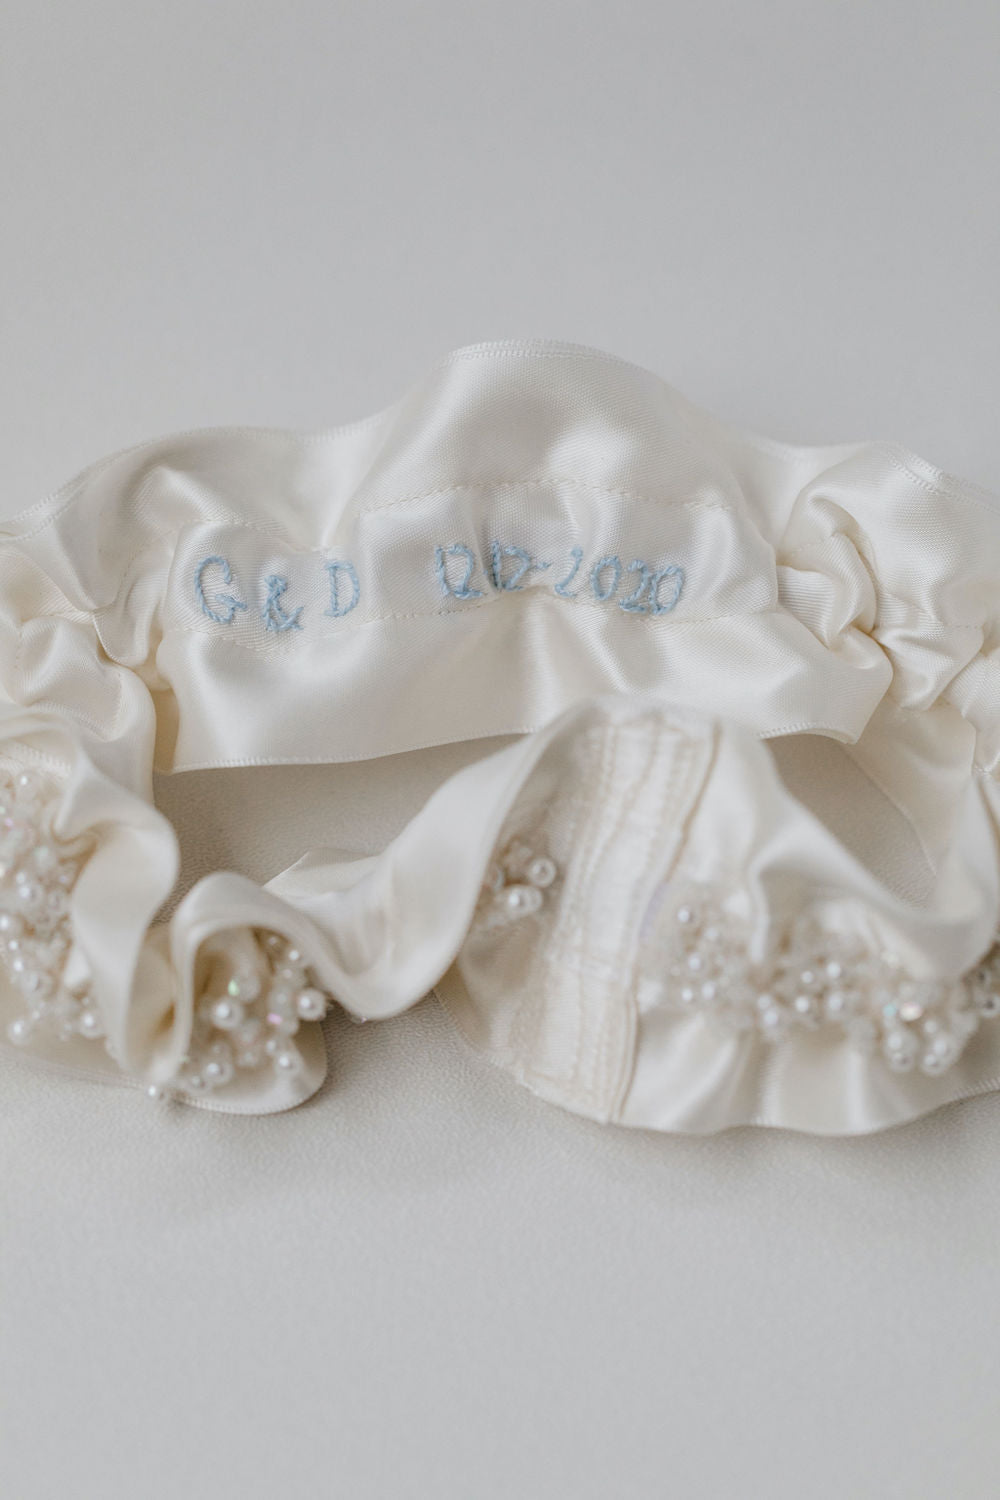 lace wedding garter heirloom hand embroidered personalized by The Garter Girll